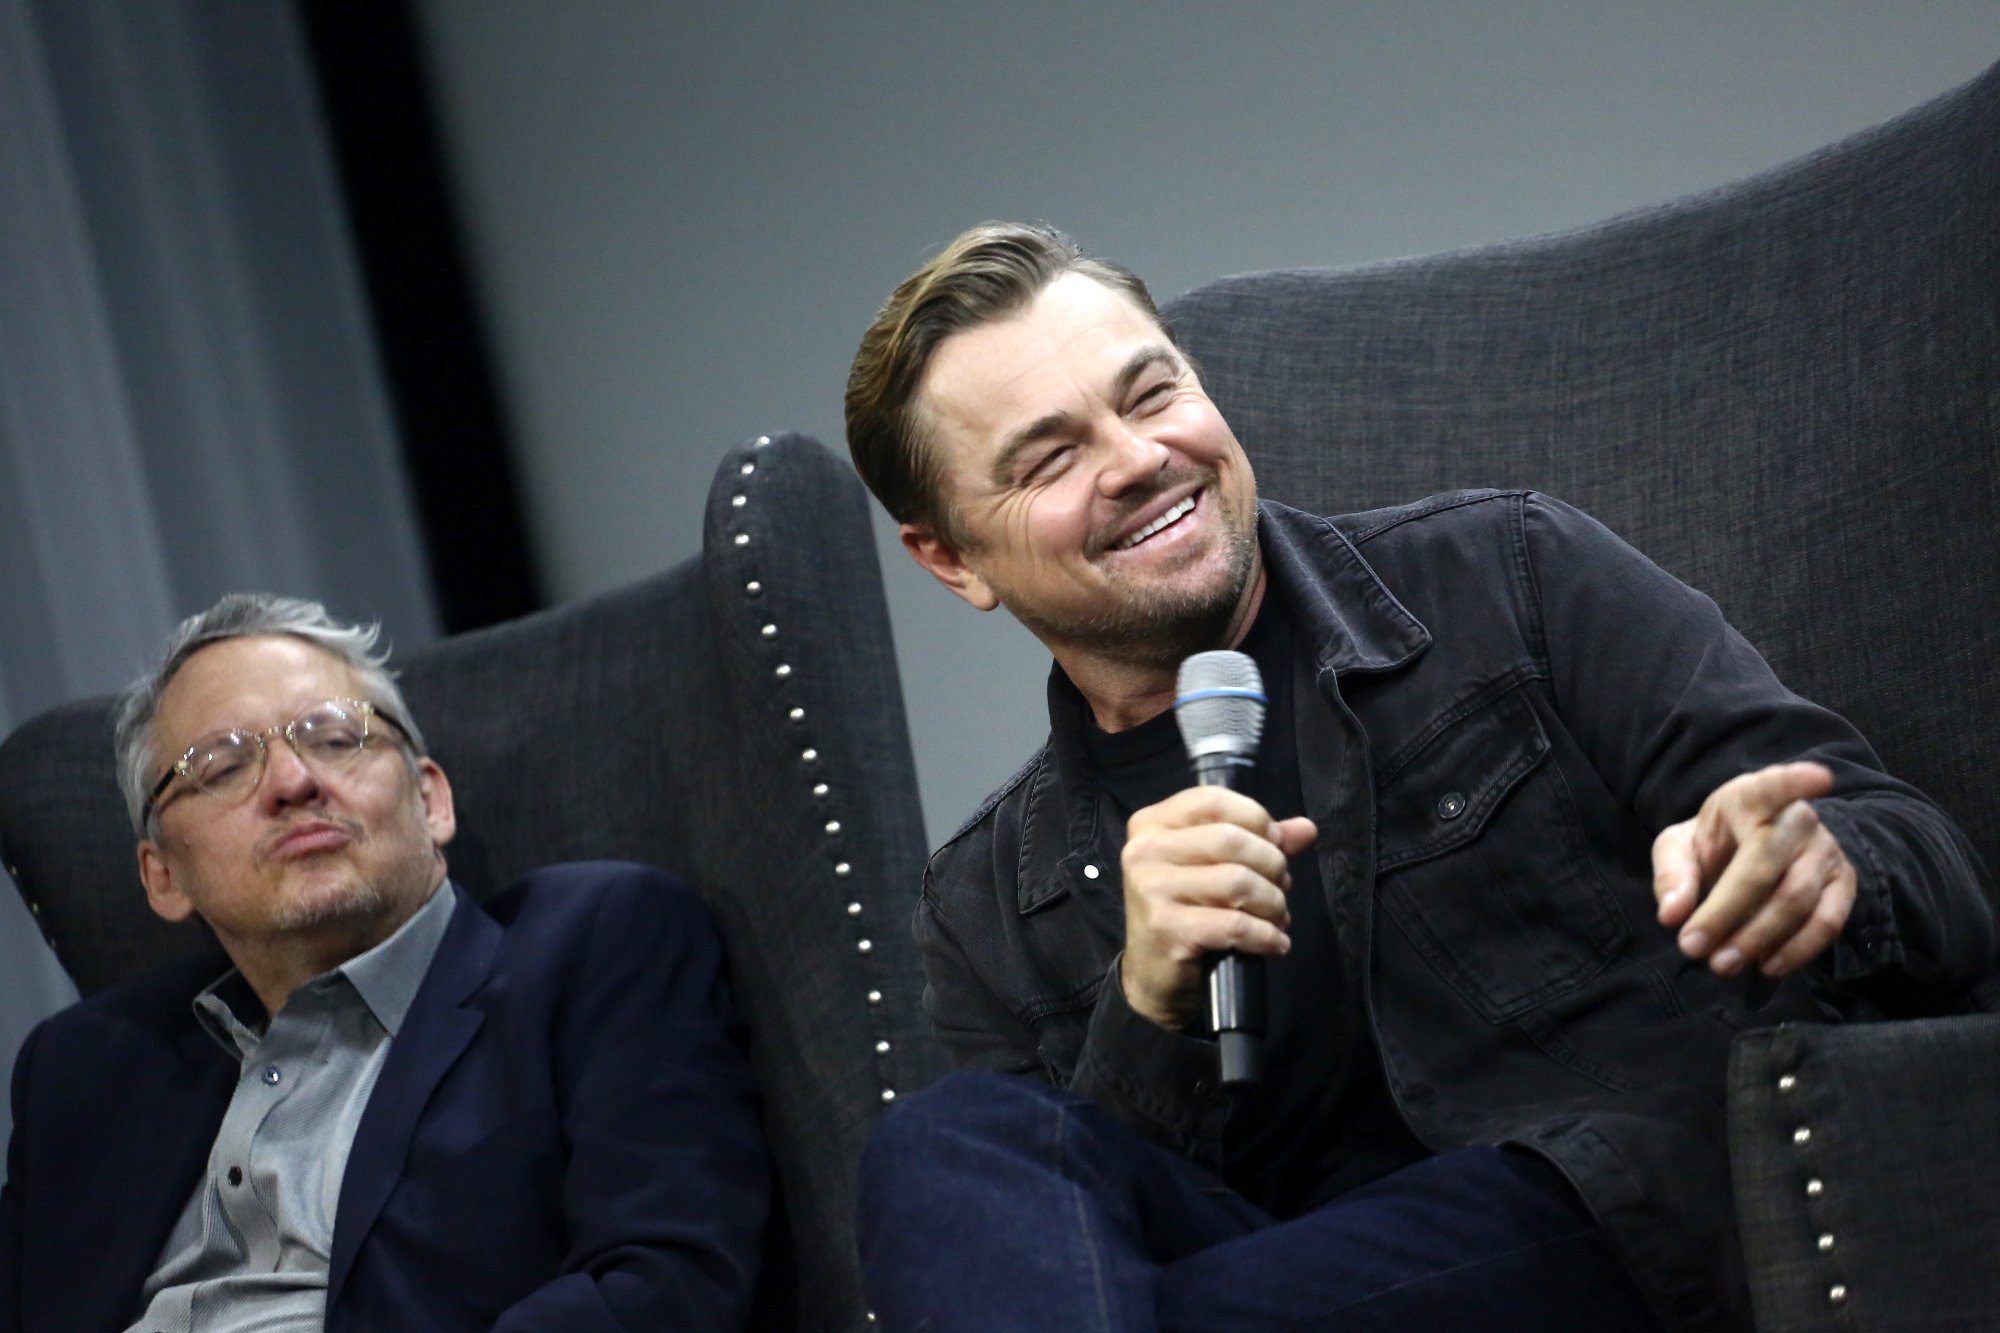 'Don't Look Up' Leonardo DiCaprio and Adam McKay sitting in chairs with a mic in front of a theater screen